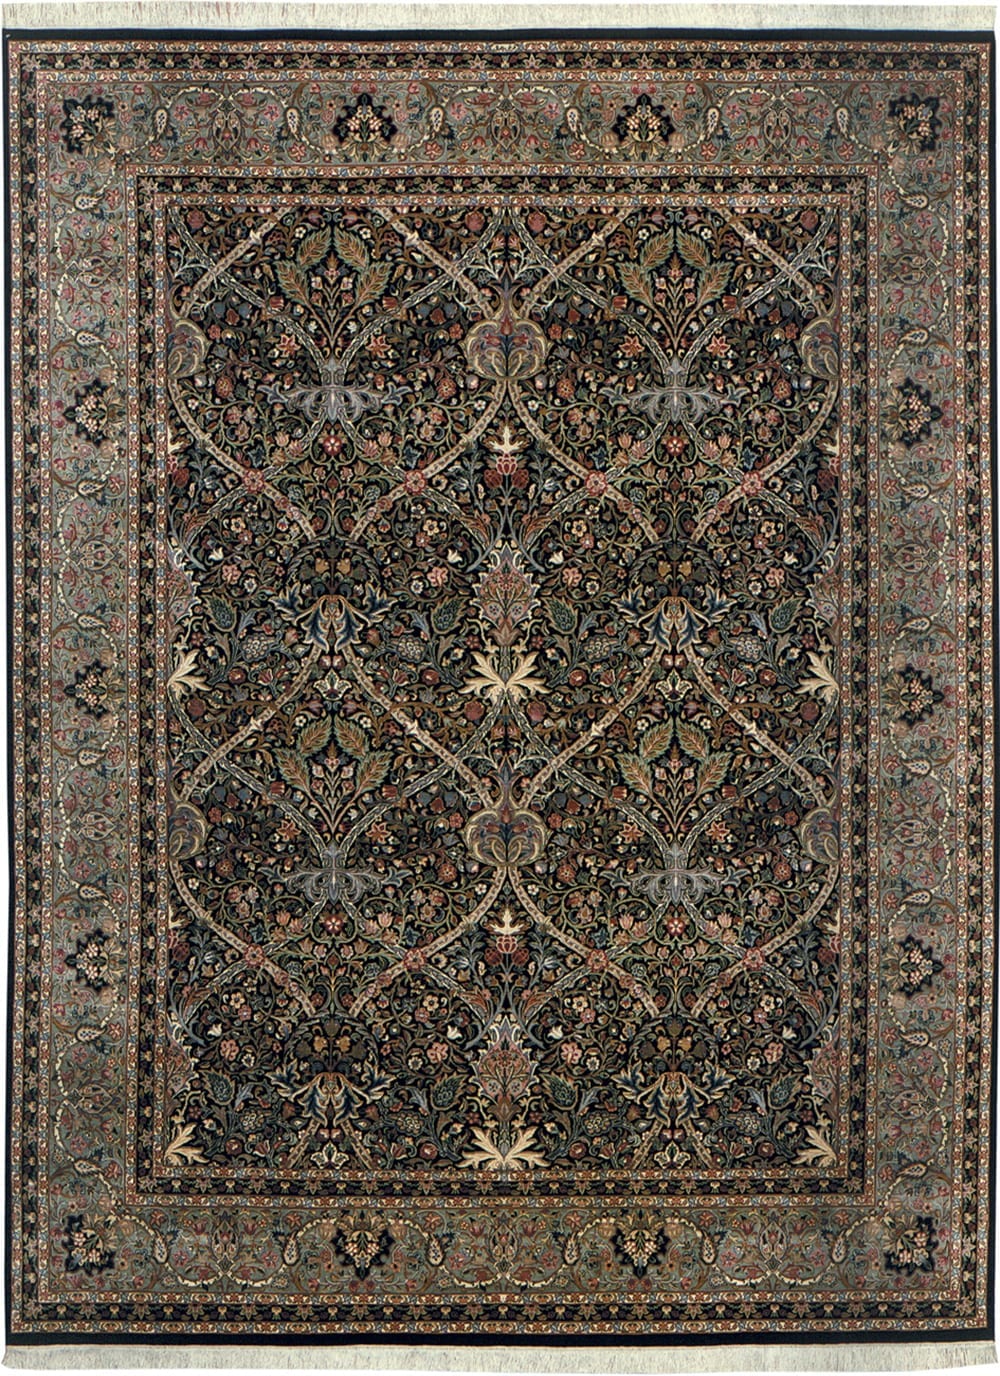 English Arts and Crafts Rug - Stickley Brand